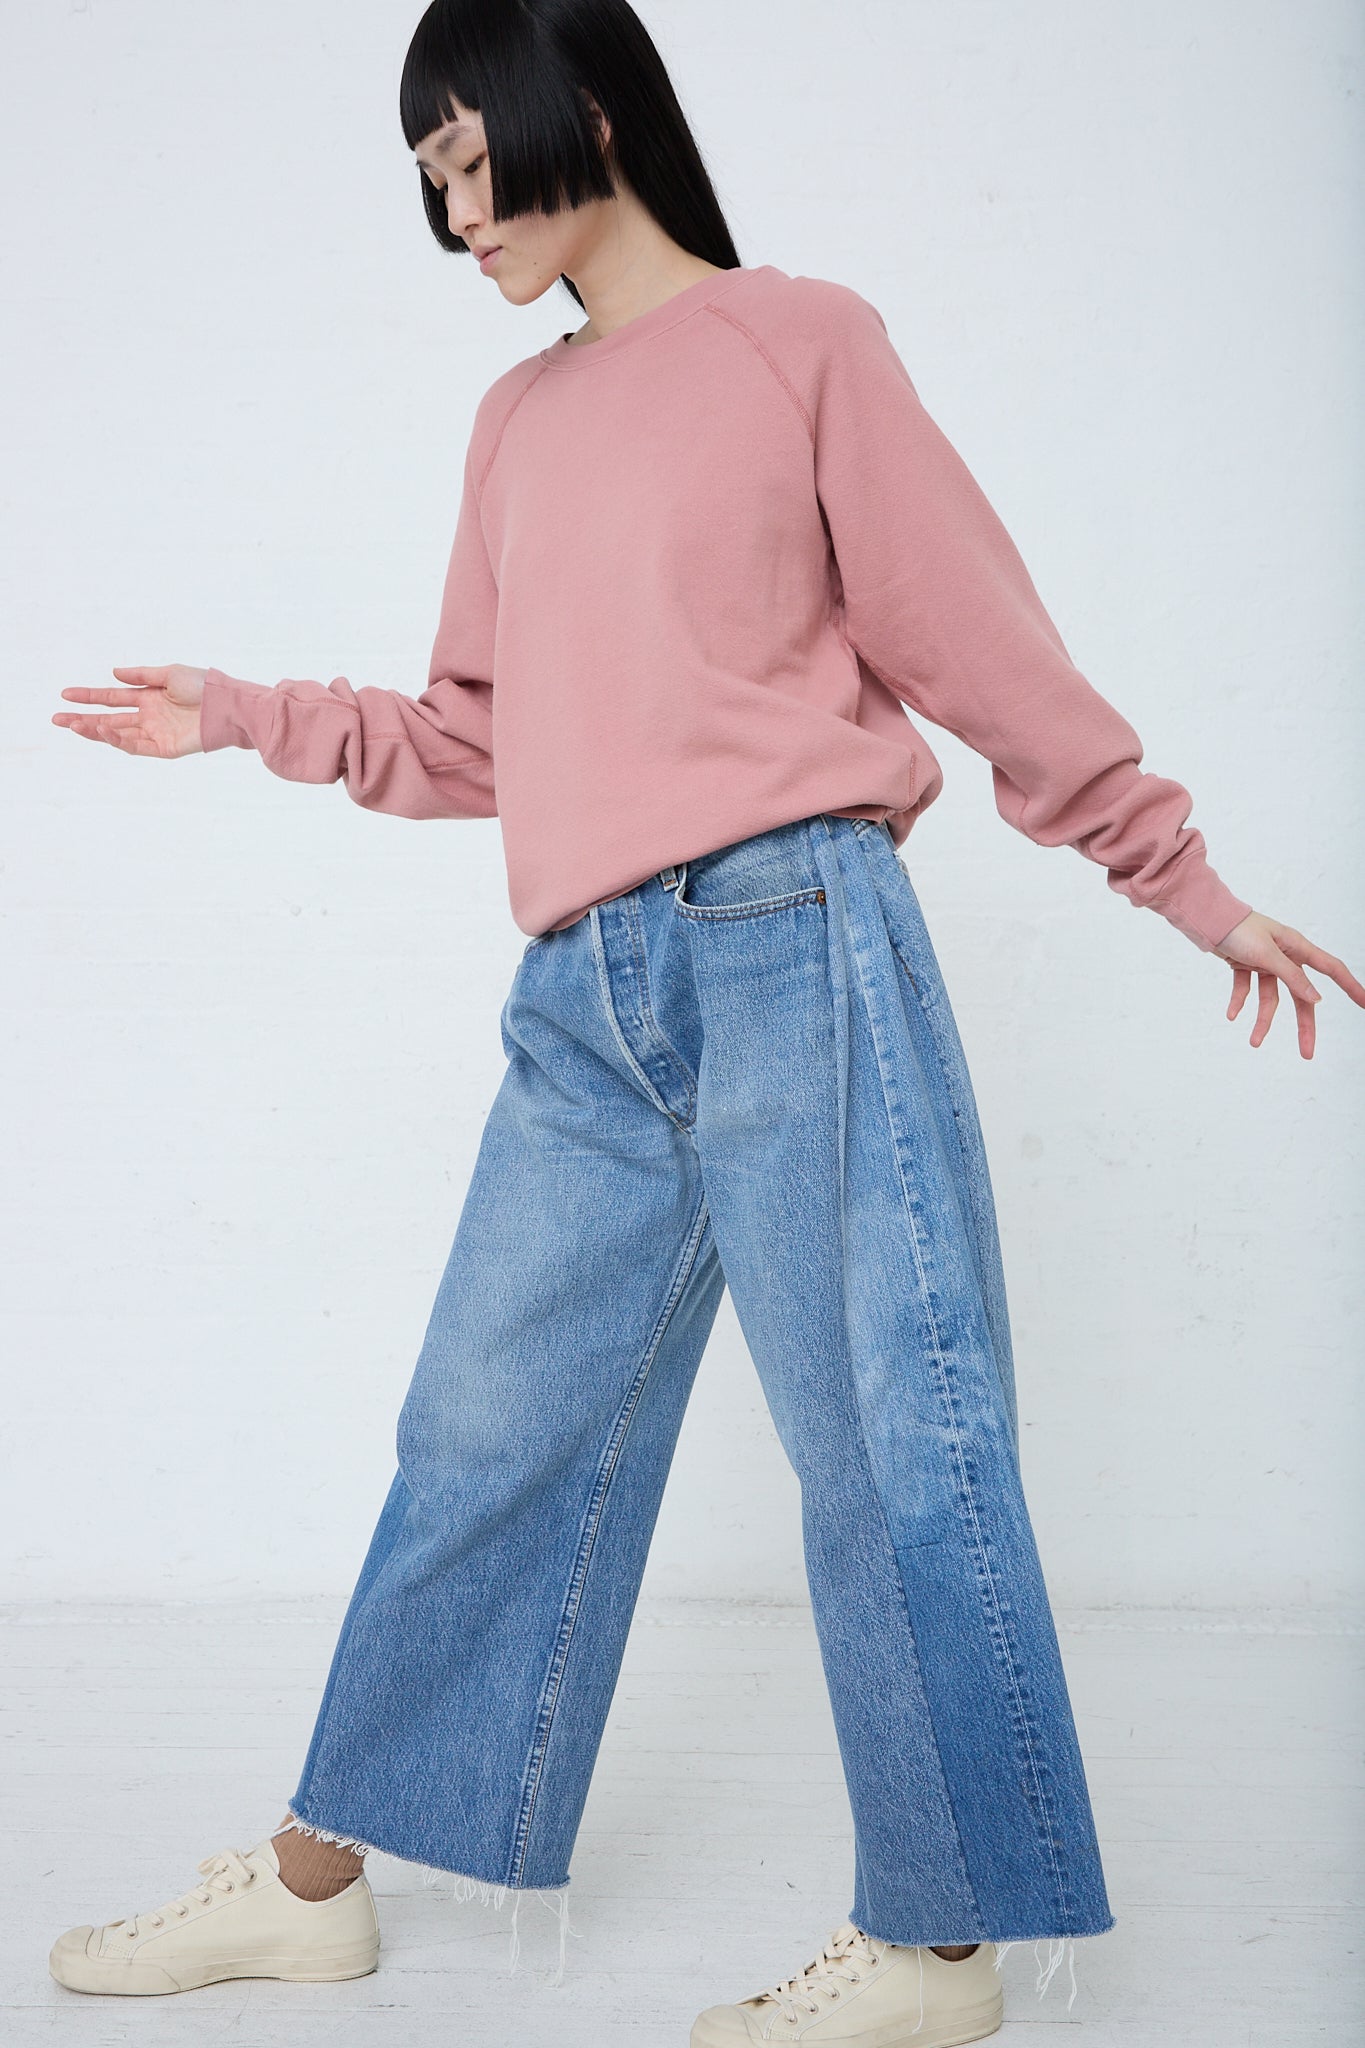 Person with short black hair wearing a pink sweatshirt and relaxed fit B Sides Vintage Lasso in Indigo blue jeans, standing indoors on a white background. They have their arms slightly extended and are looking down.